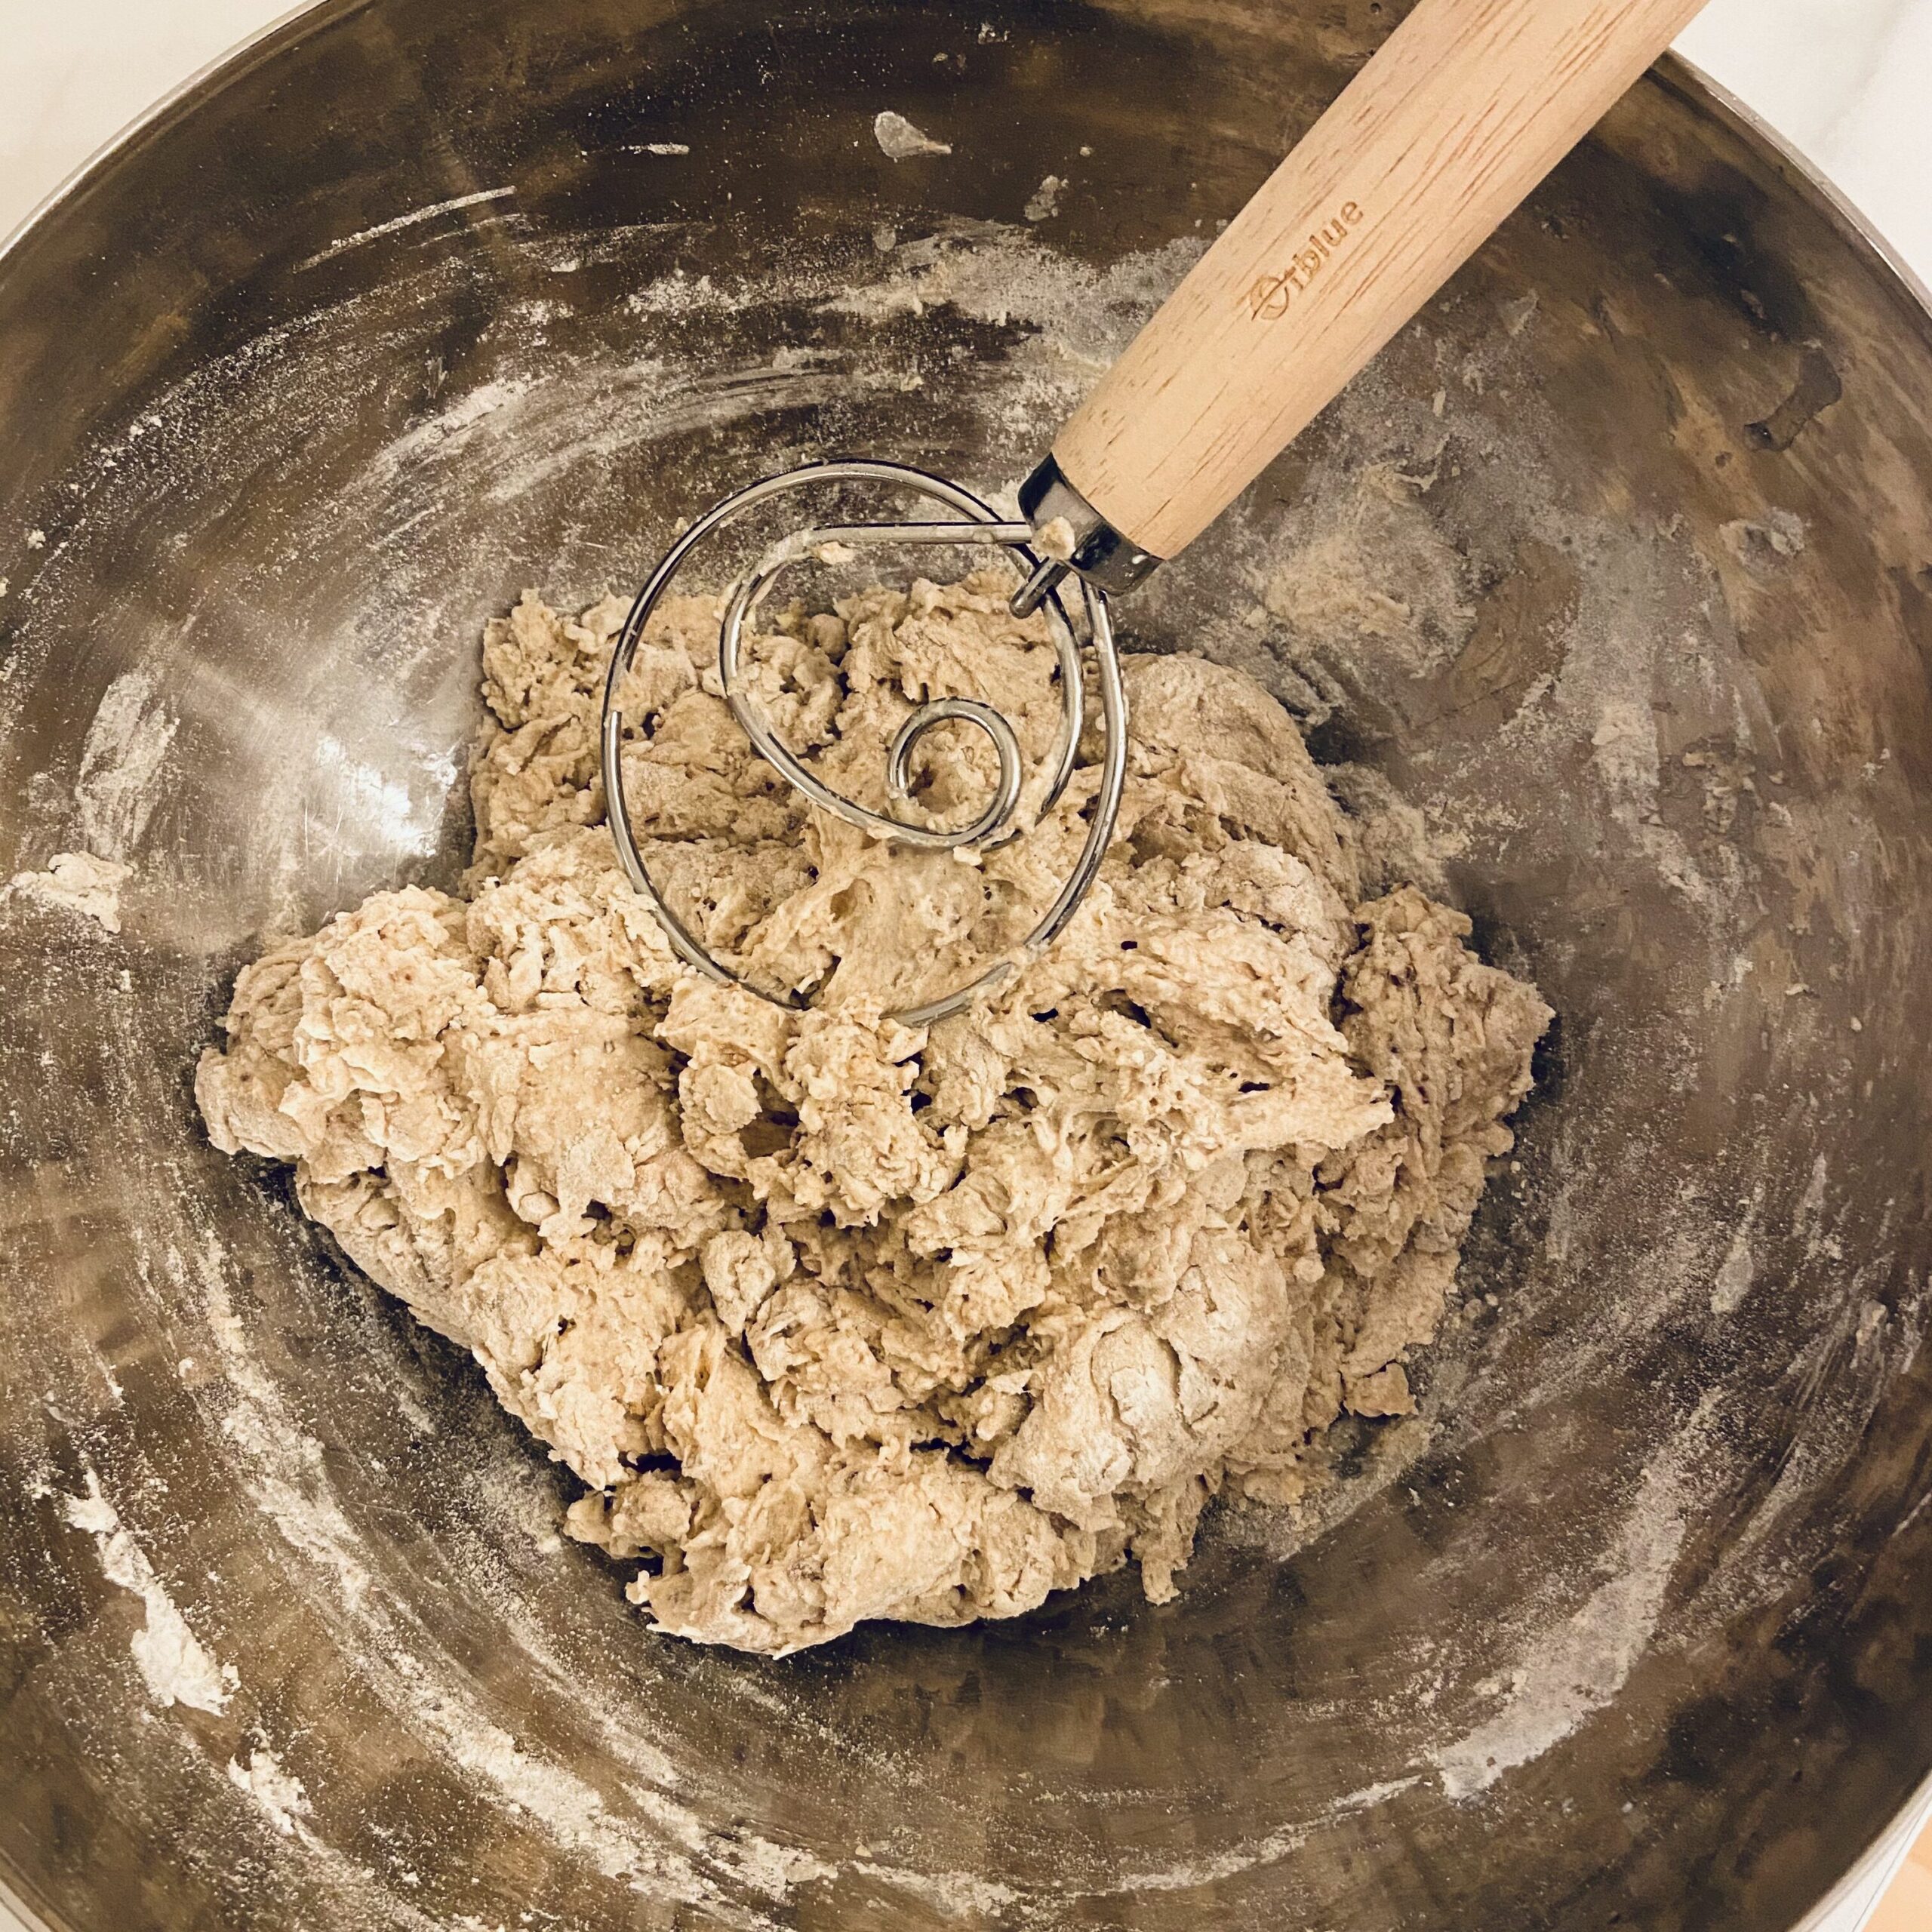 All dough ingredients combined to autolyse before kneading. 